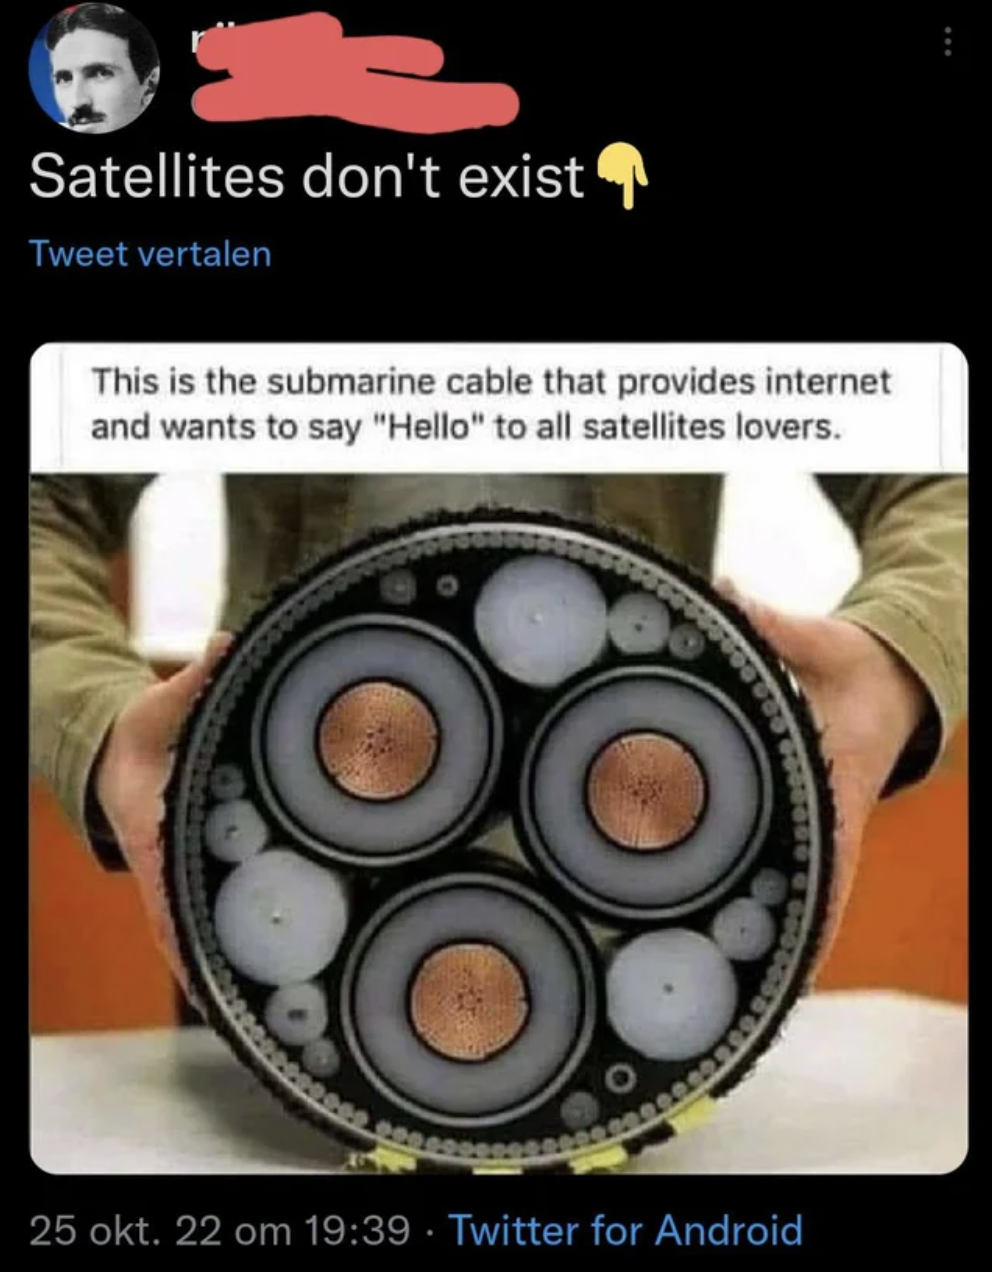 Funny facepalms - deep sea cable cross section - Satellites don't exist Tweet vertalen This is the submarine cable that provides internet and wants to say